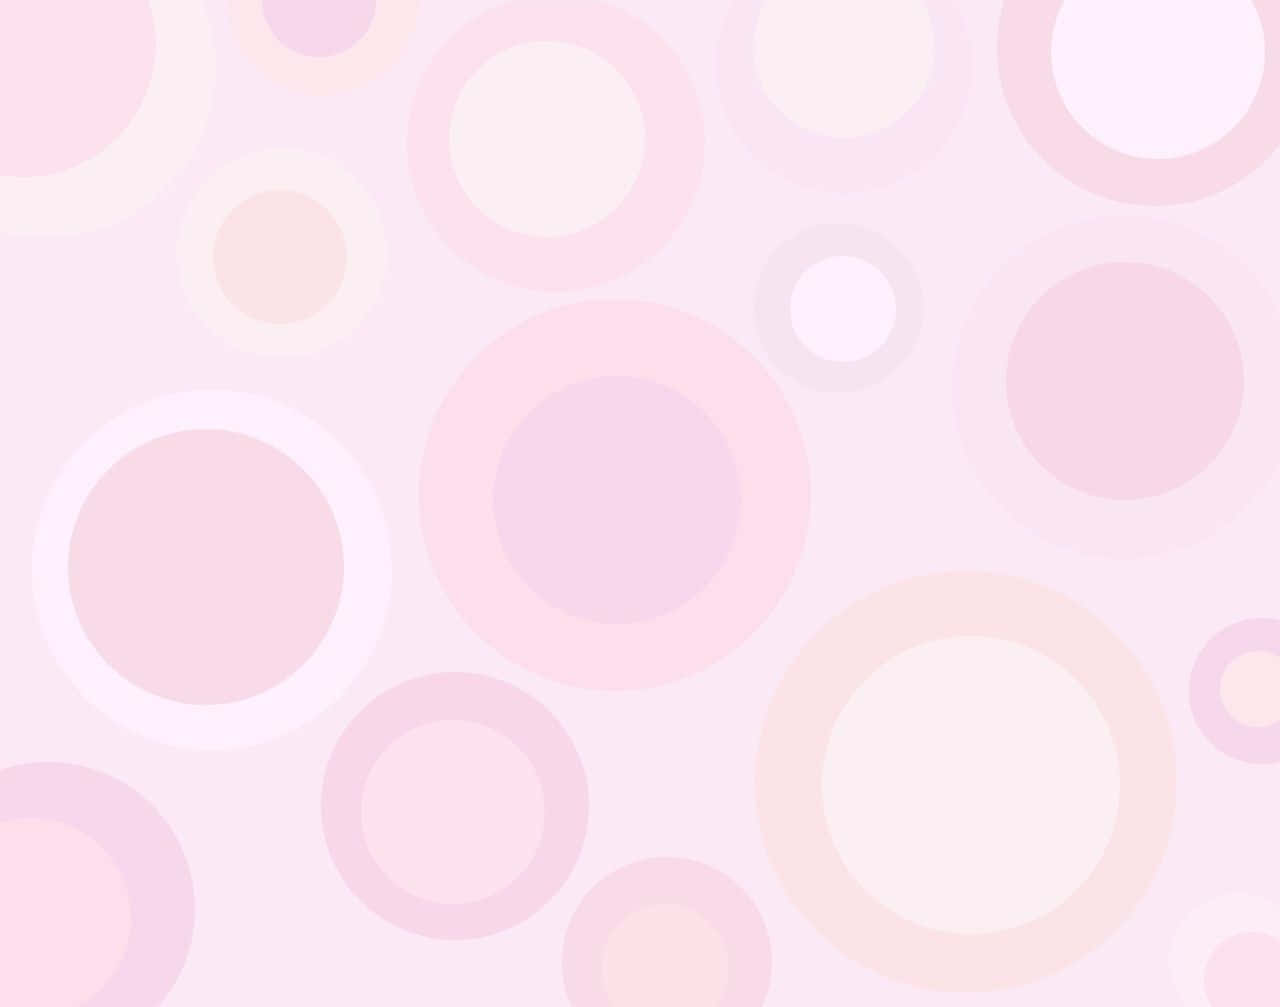 Aesthetic Computer Light Pink And Purple Retro Circles Wallpaper